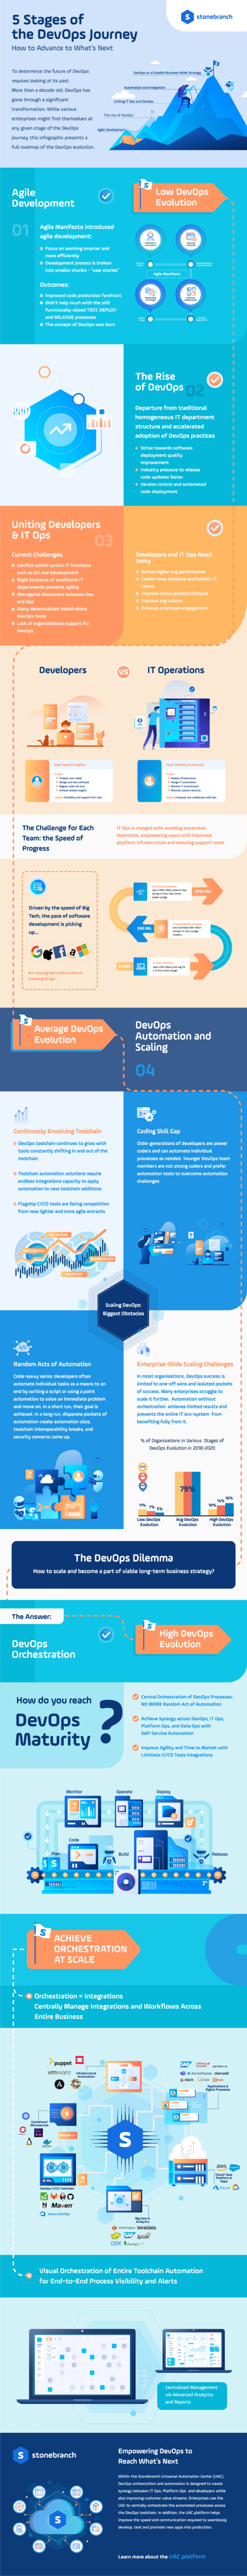 5 Stages of the DevOps Journey: A Roadmap for Advancing to the Next Level Infographic